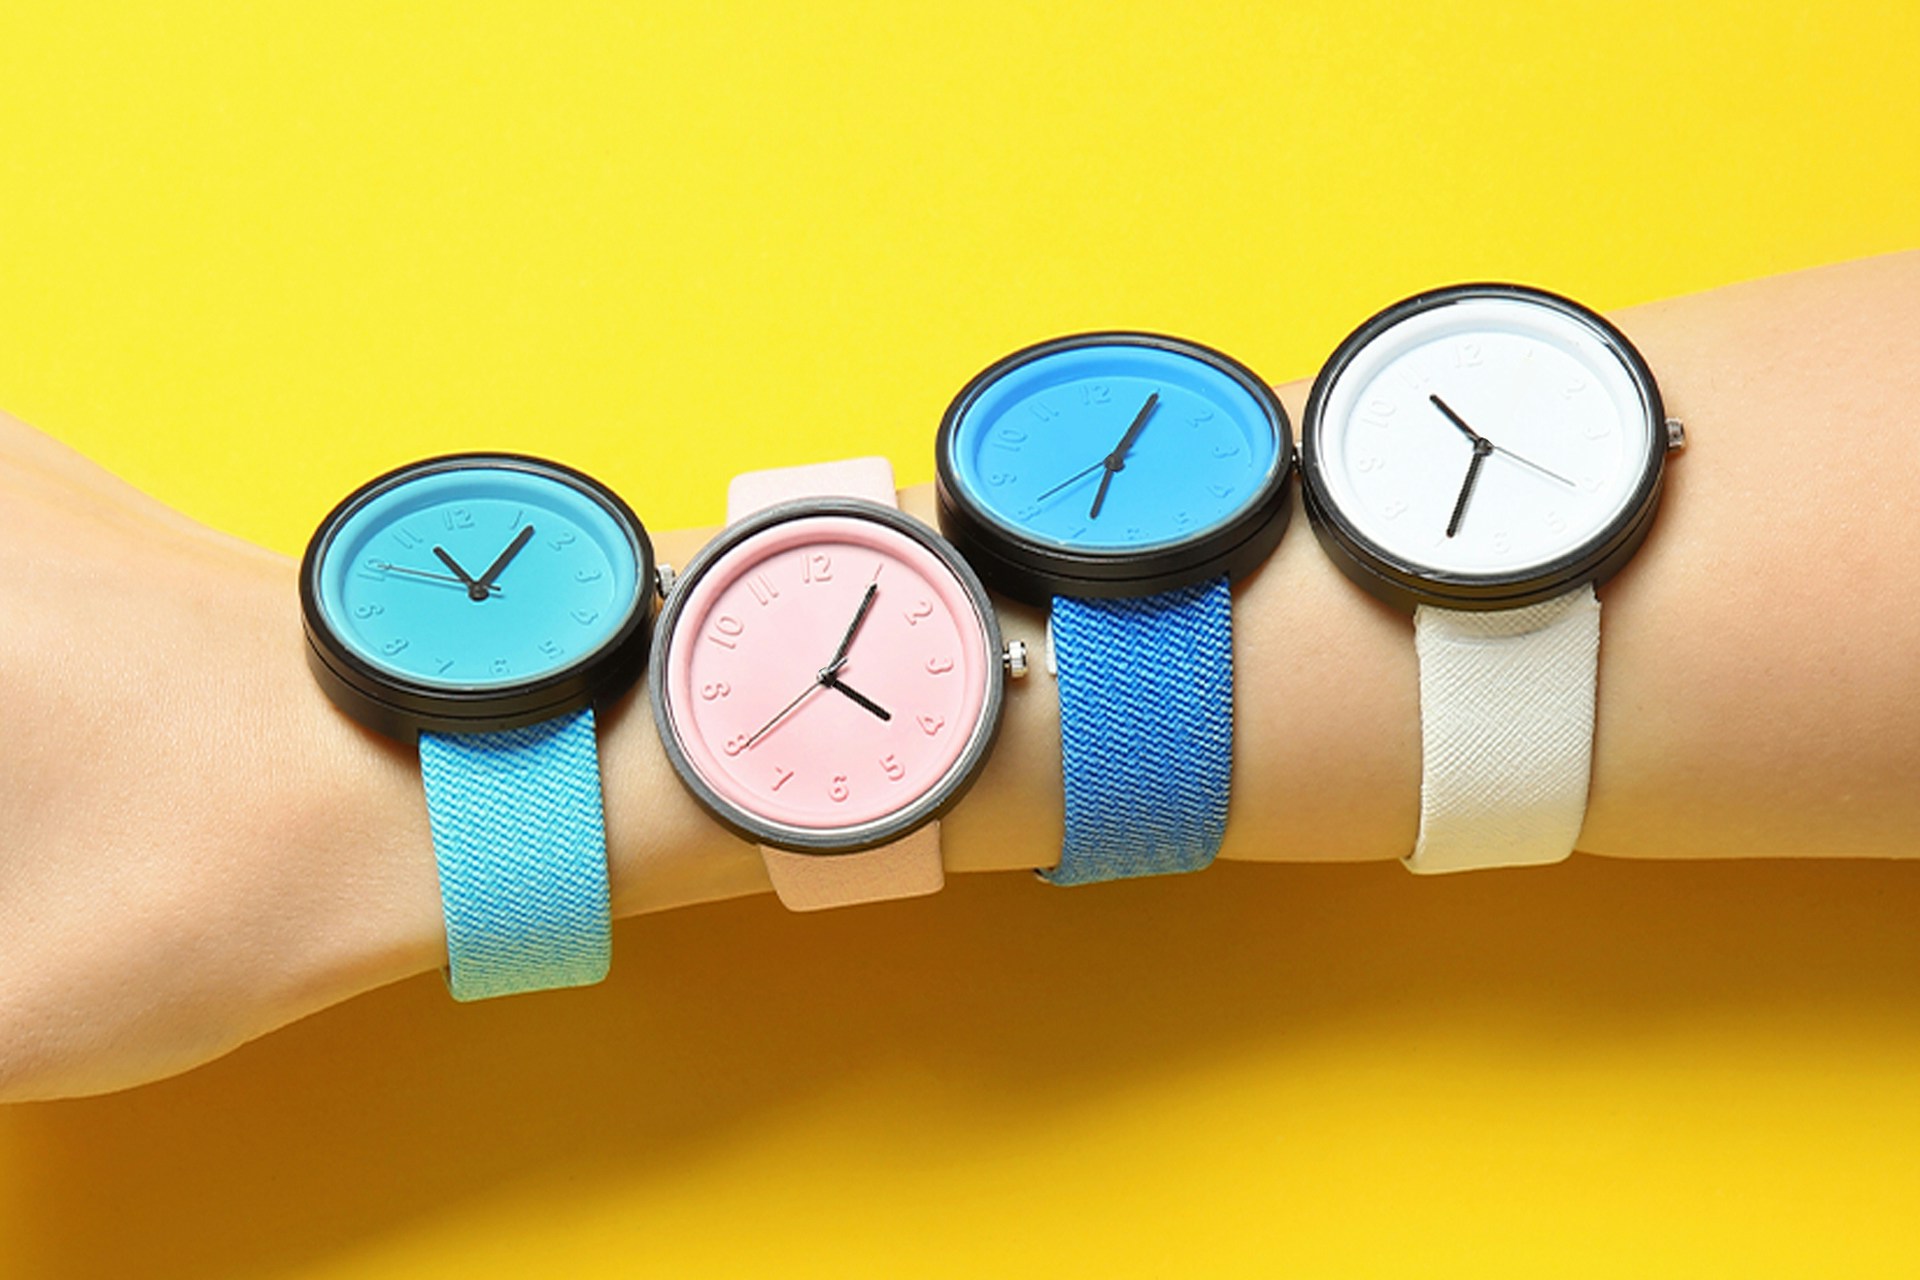 Person wearing multiple watches for different time zones on bright yellow background. Hero image for social media management blog post.